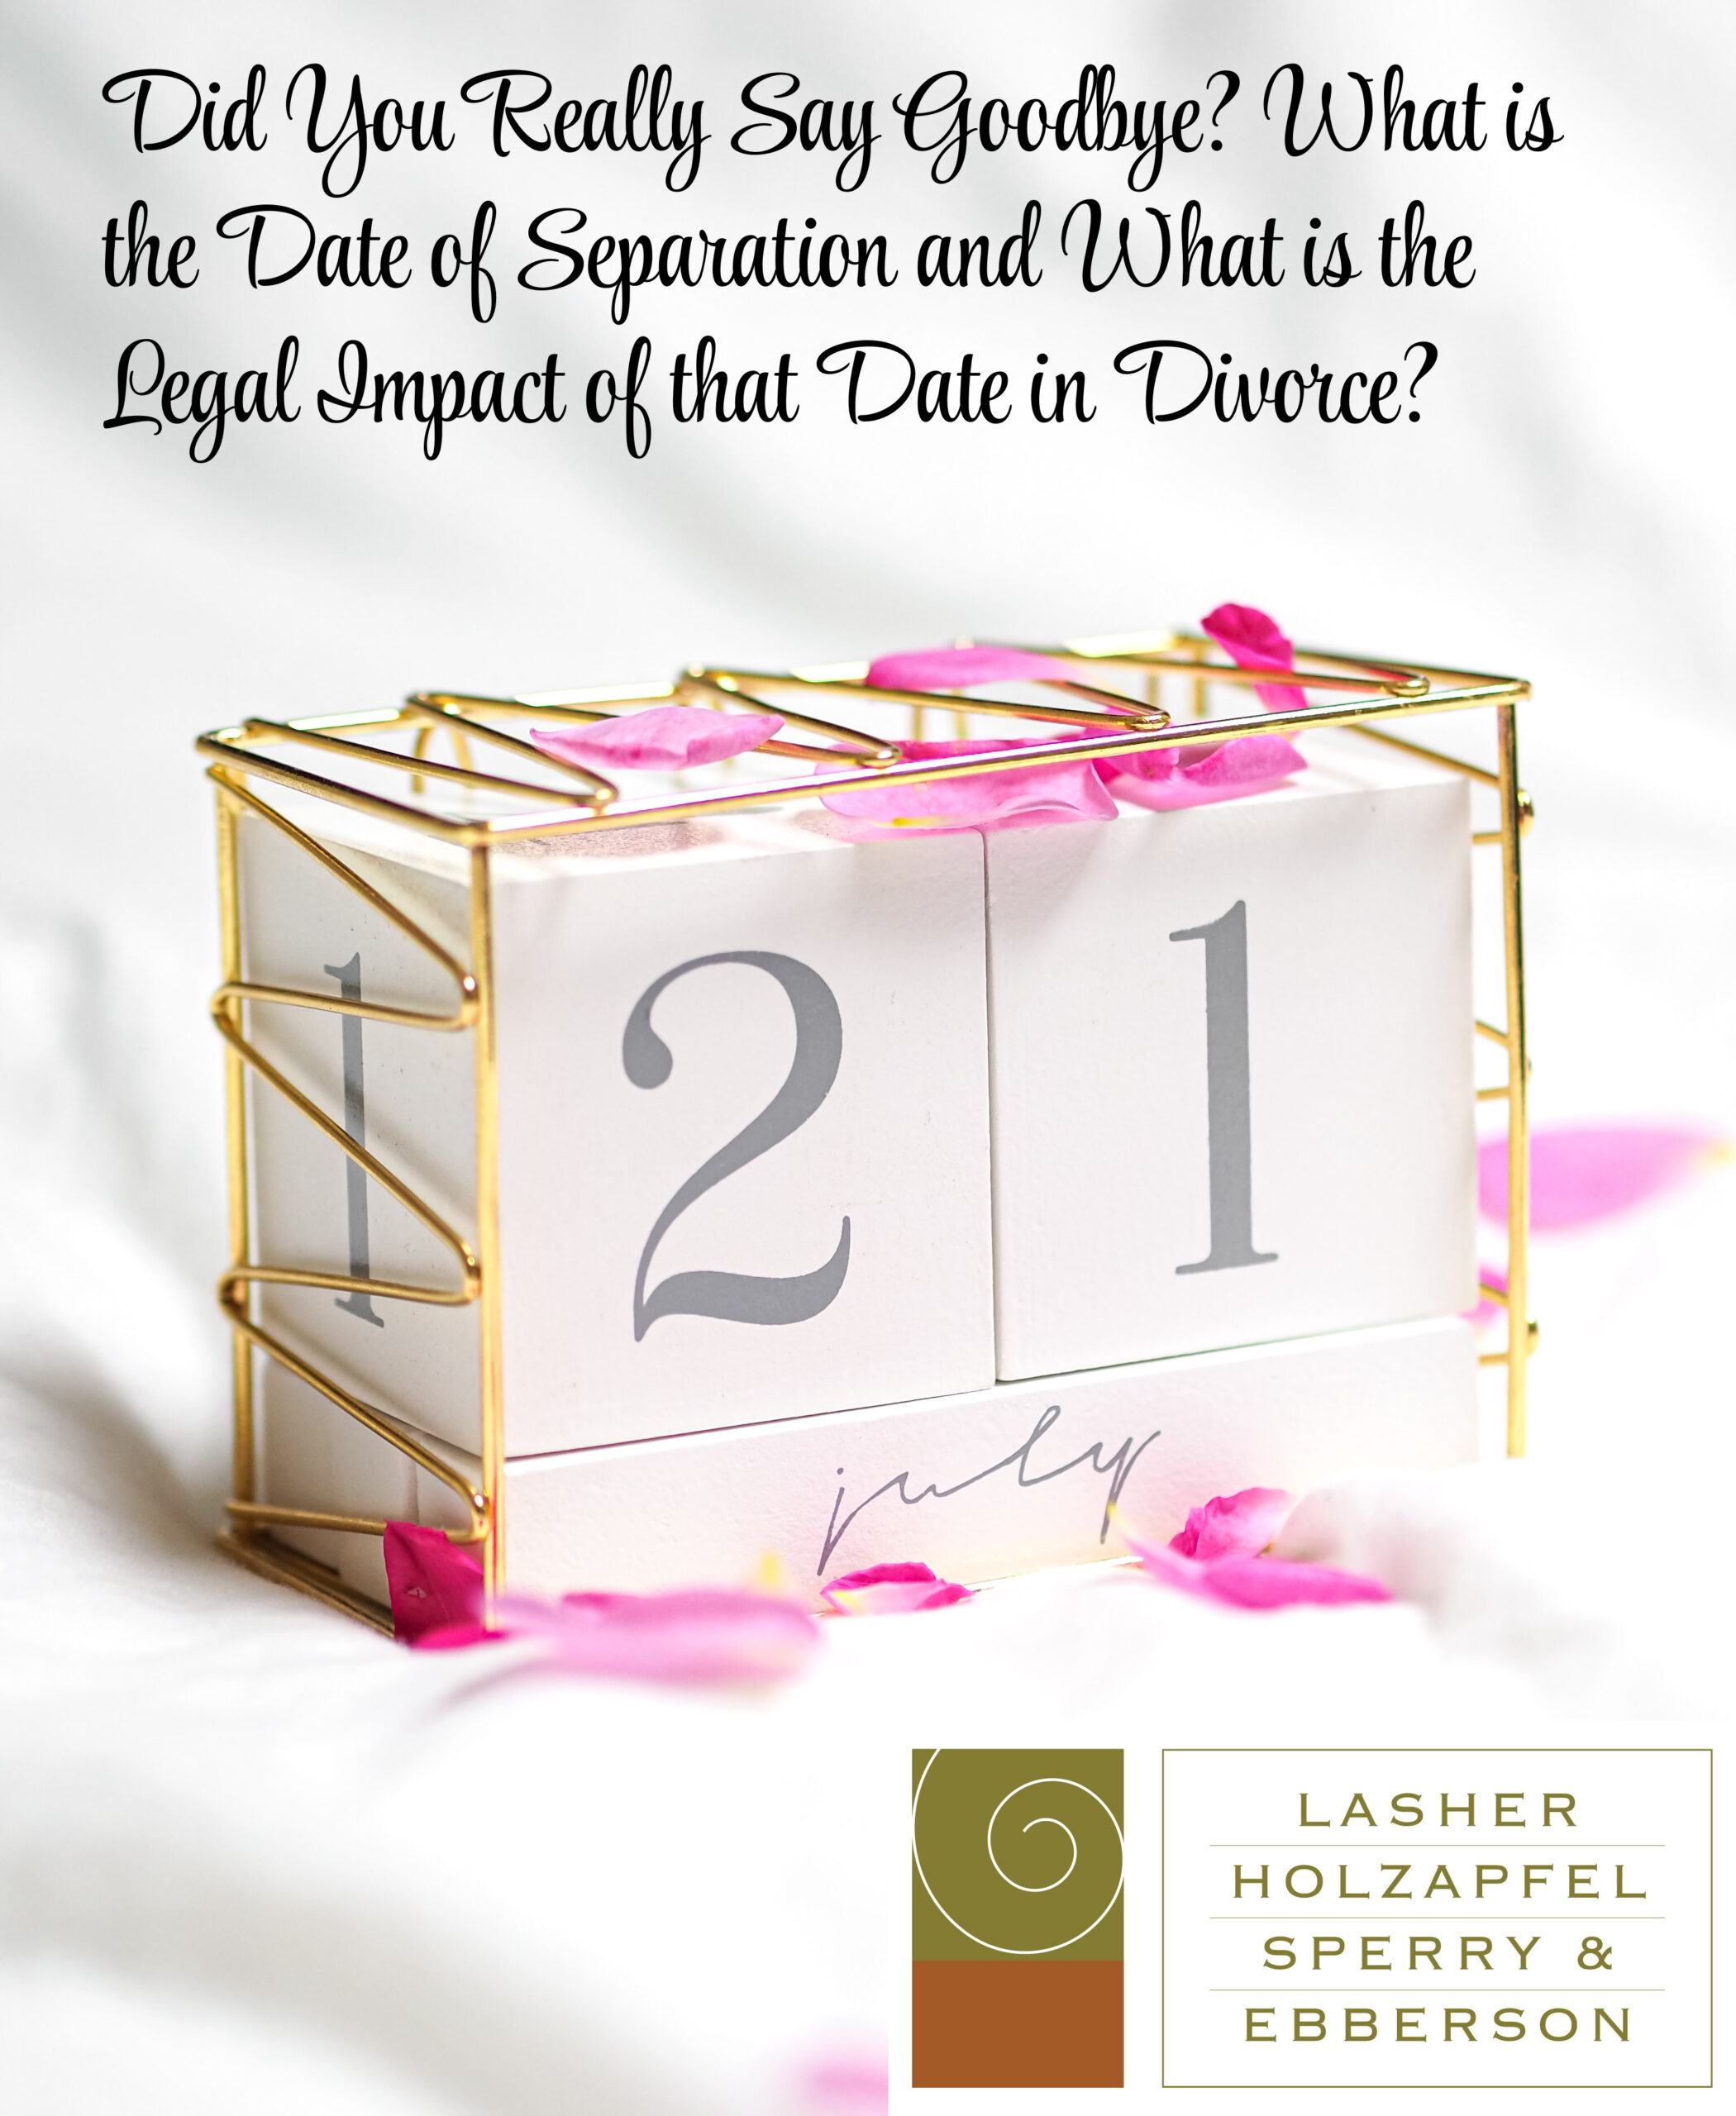 Did You Really Say Goodbye? What is the Date of Separation and What is the Legal Impact of that Date in Divorce?